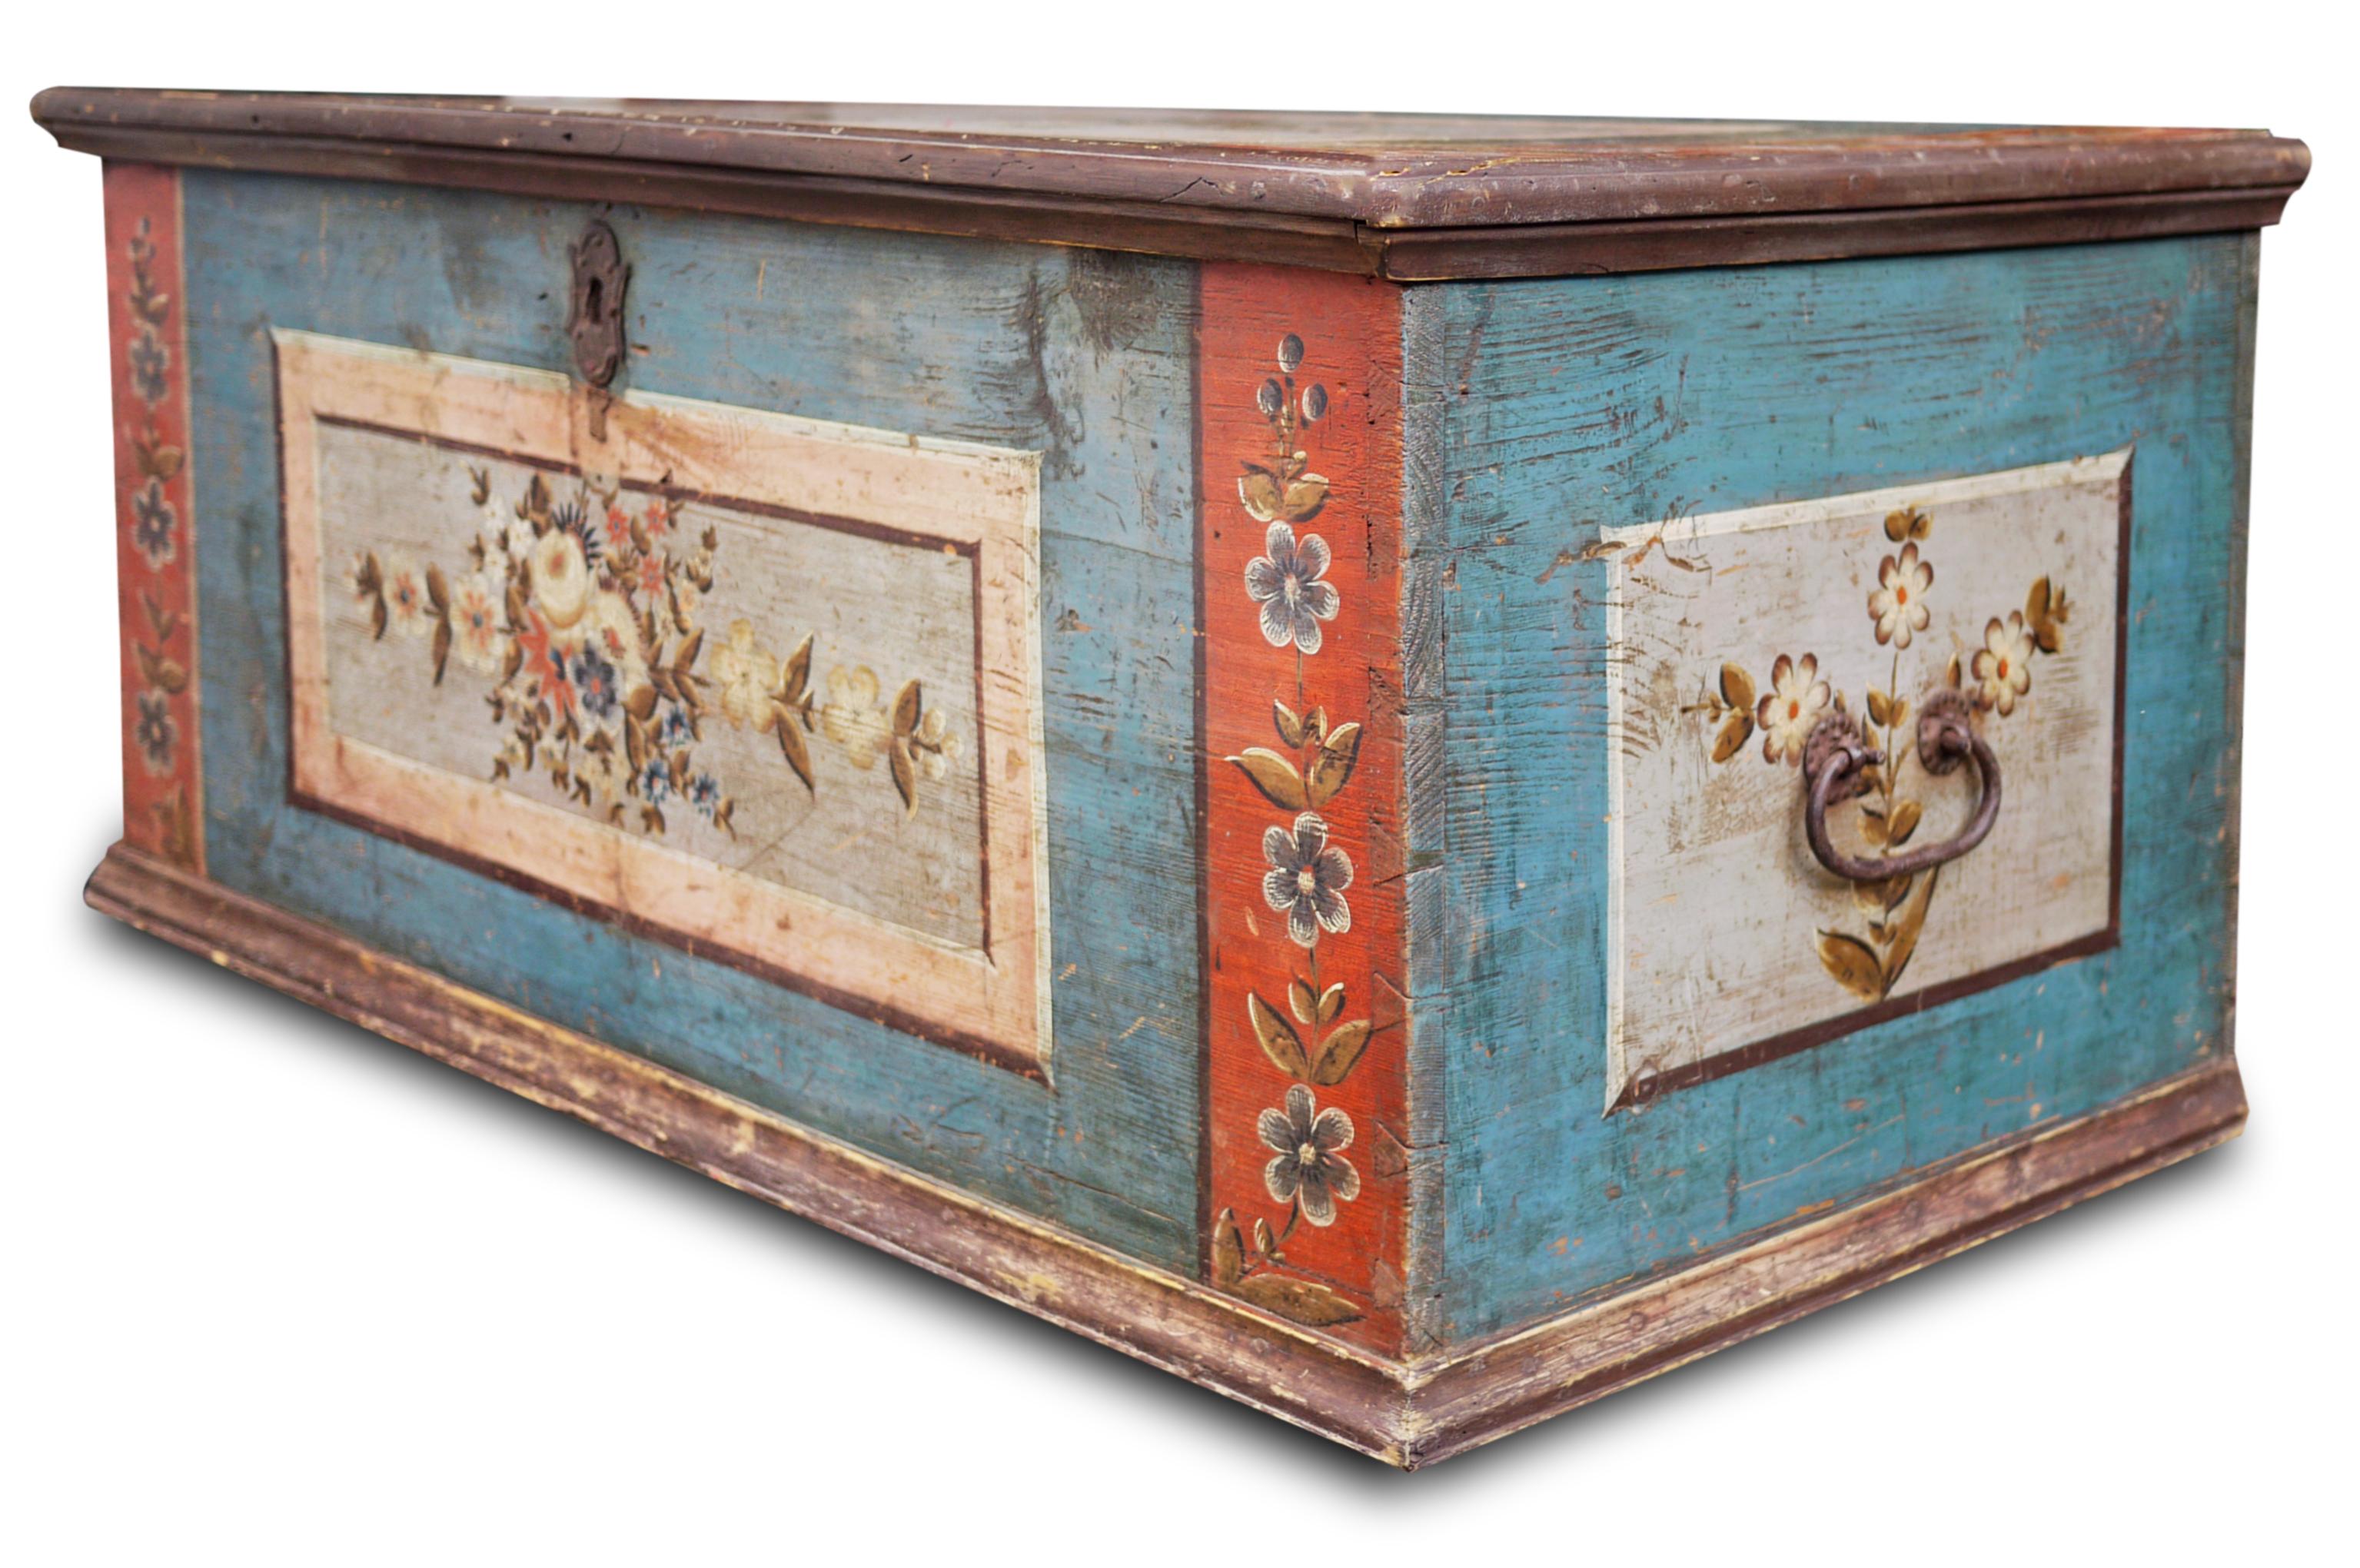 Blue tyrolean chest with flowers

Measures: H. 55cm – L. 120cm – P. 65cm

Ancient Tyrolean chest entirely painted in blue, with red borders running along the front and the lid.
The front has a painted background with a rich floral decoration in